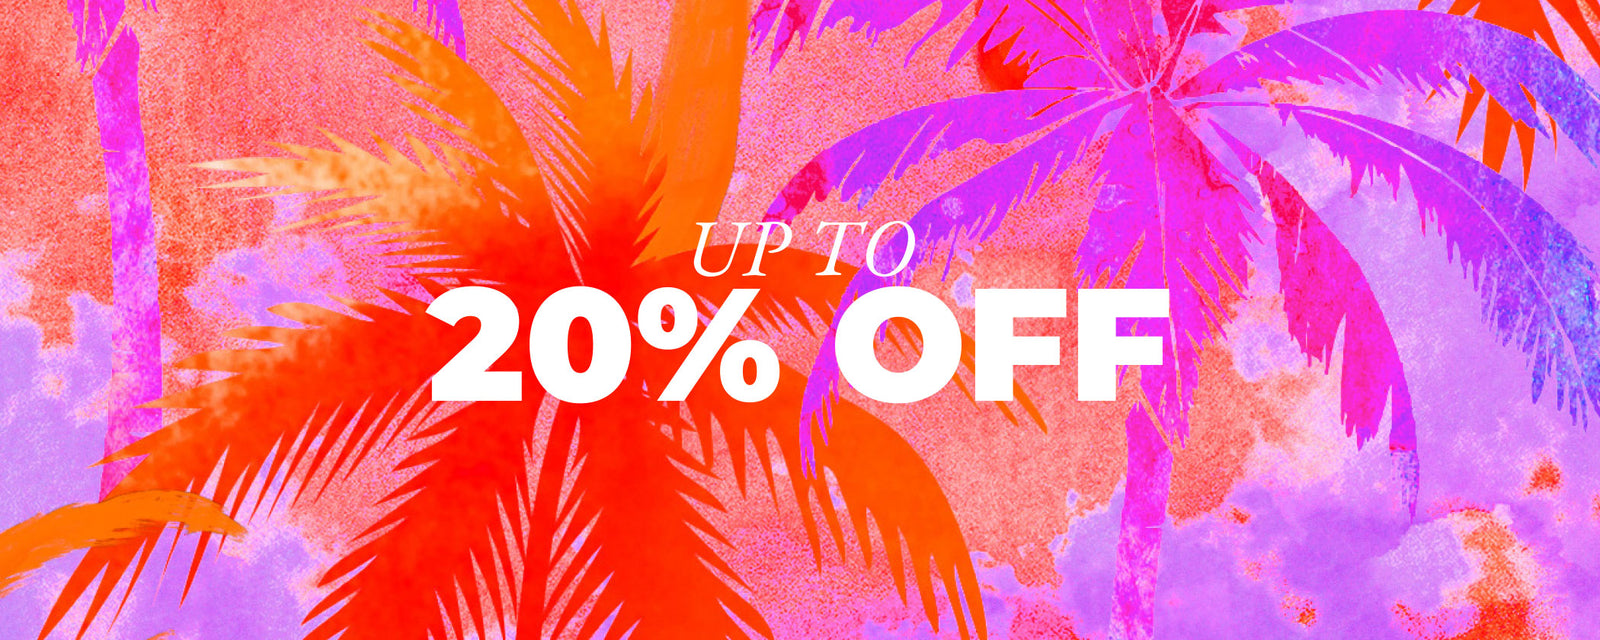 UP TO 20% OFF